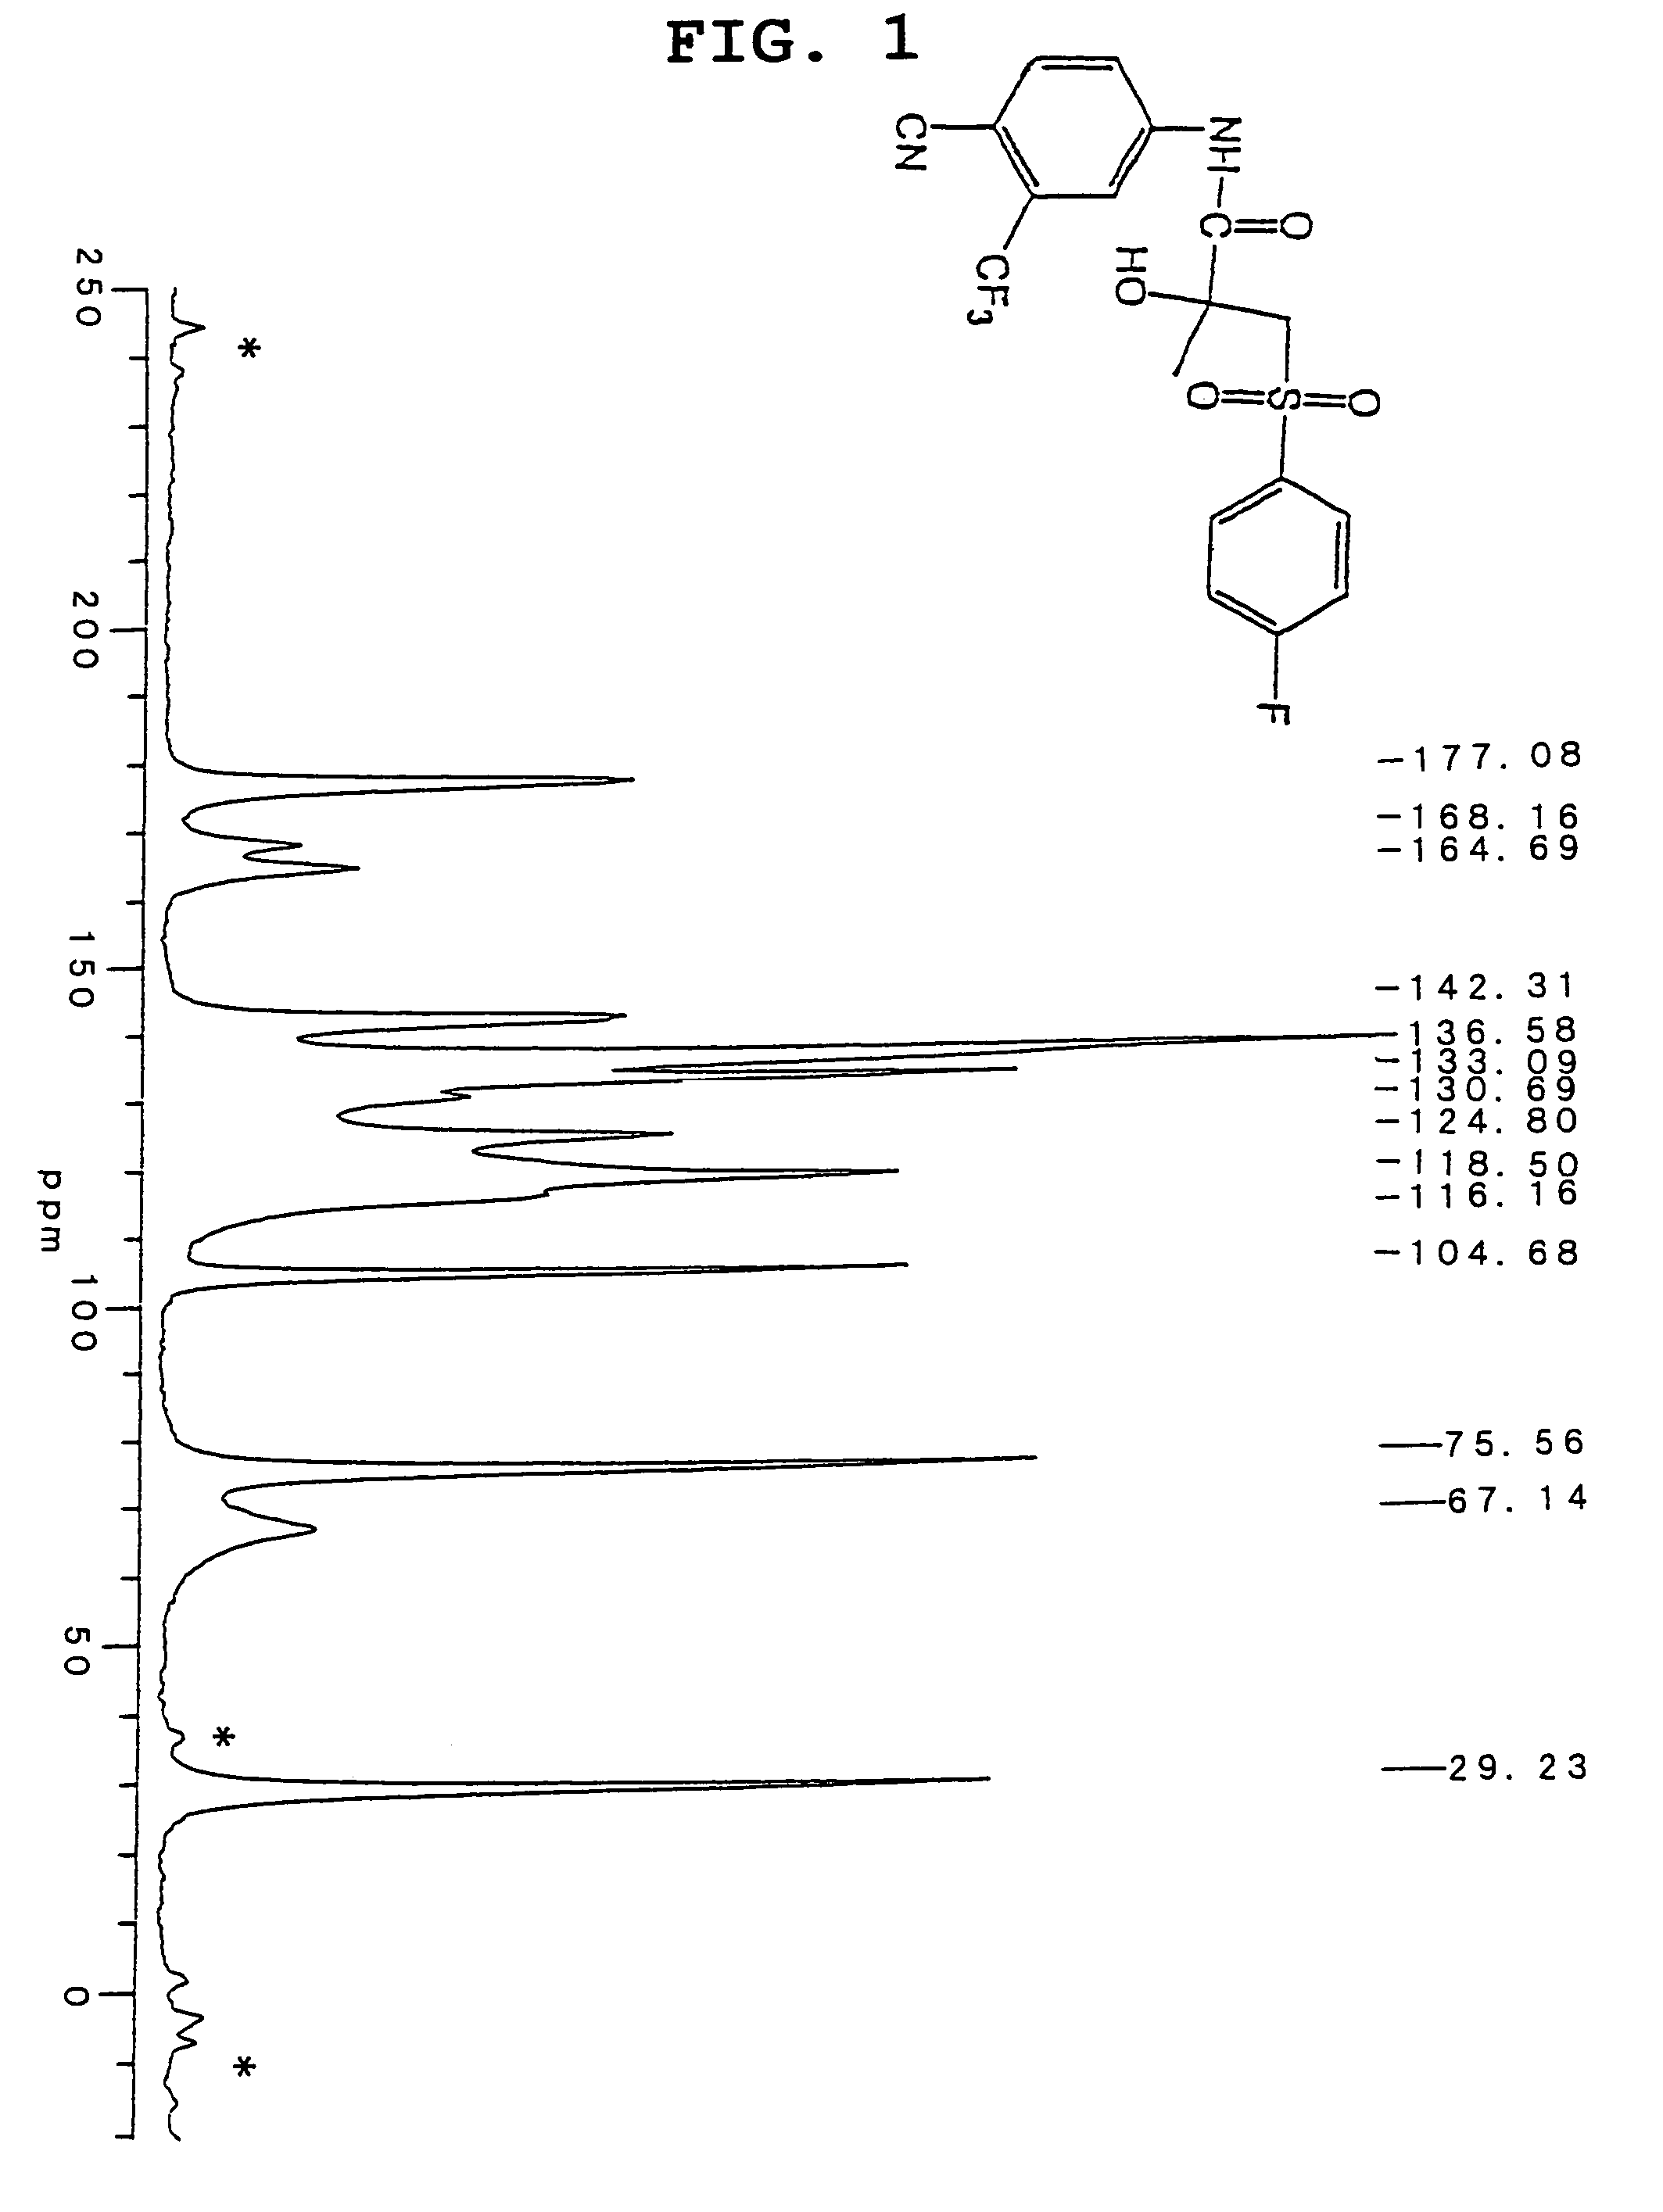 Crystal of bicalutamide and production method thereof